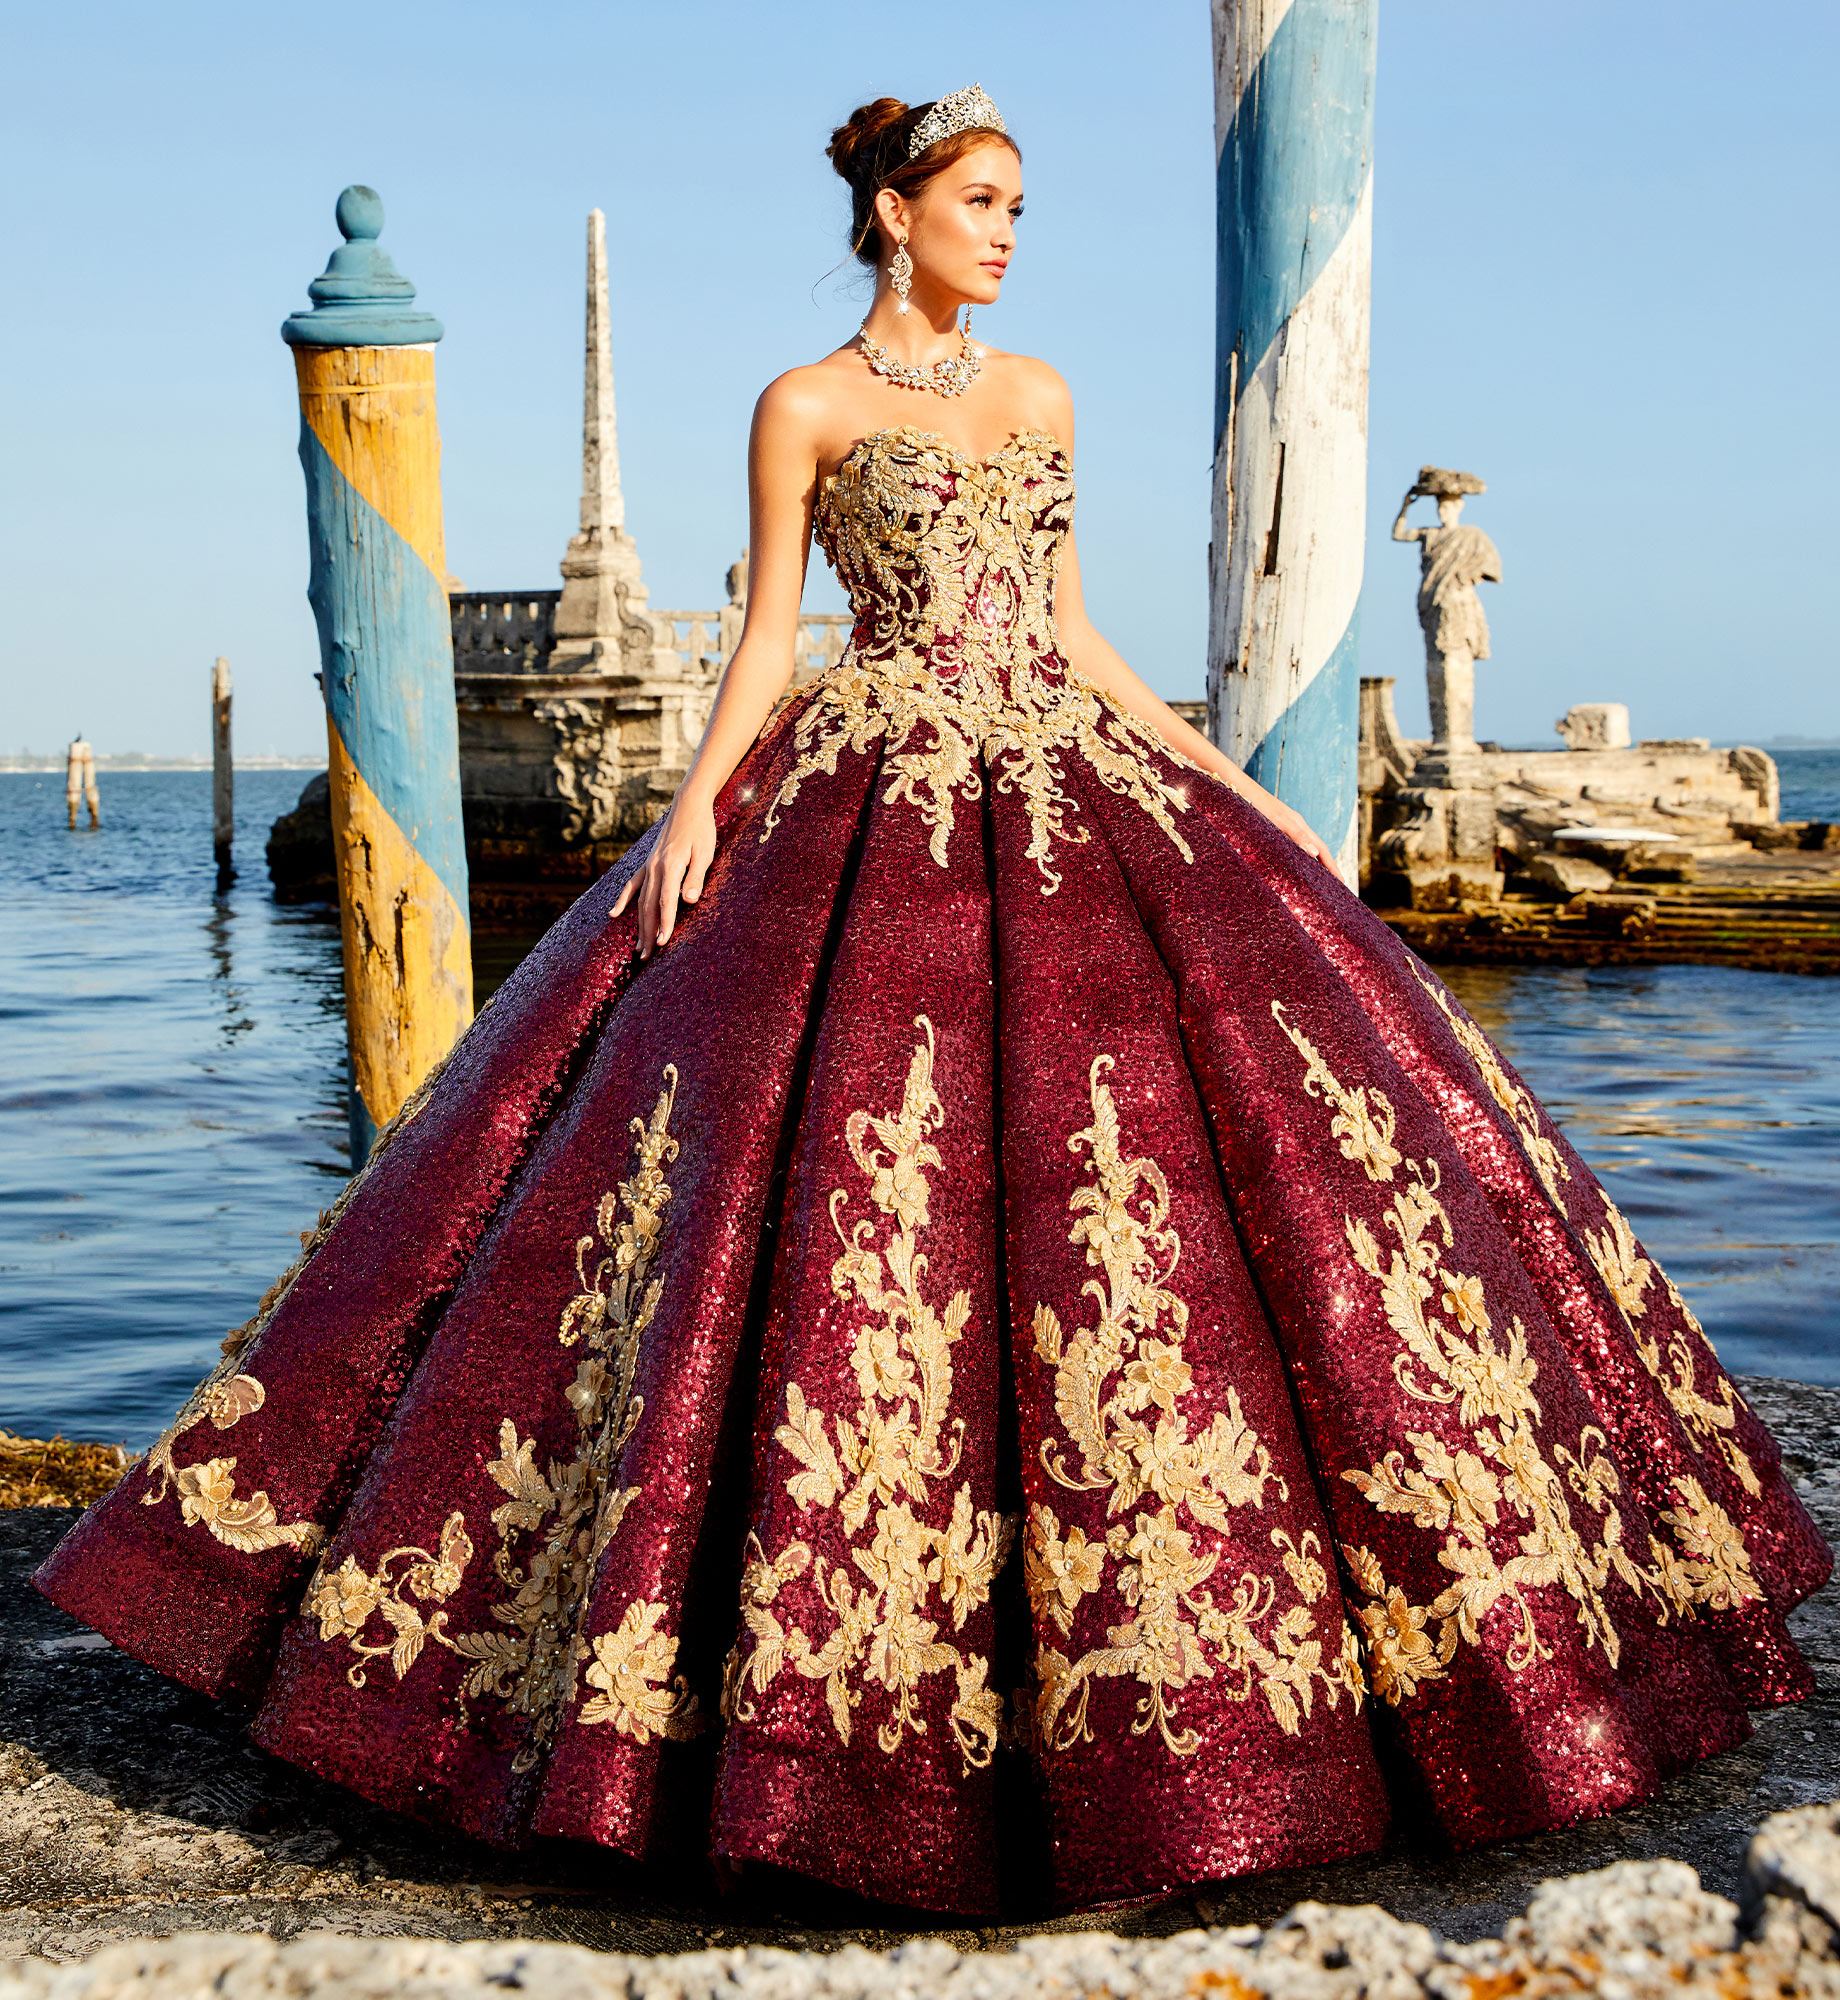 Brunette model at seaside wearing red and gold quinceañera dress